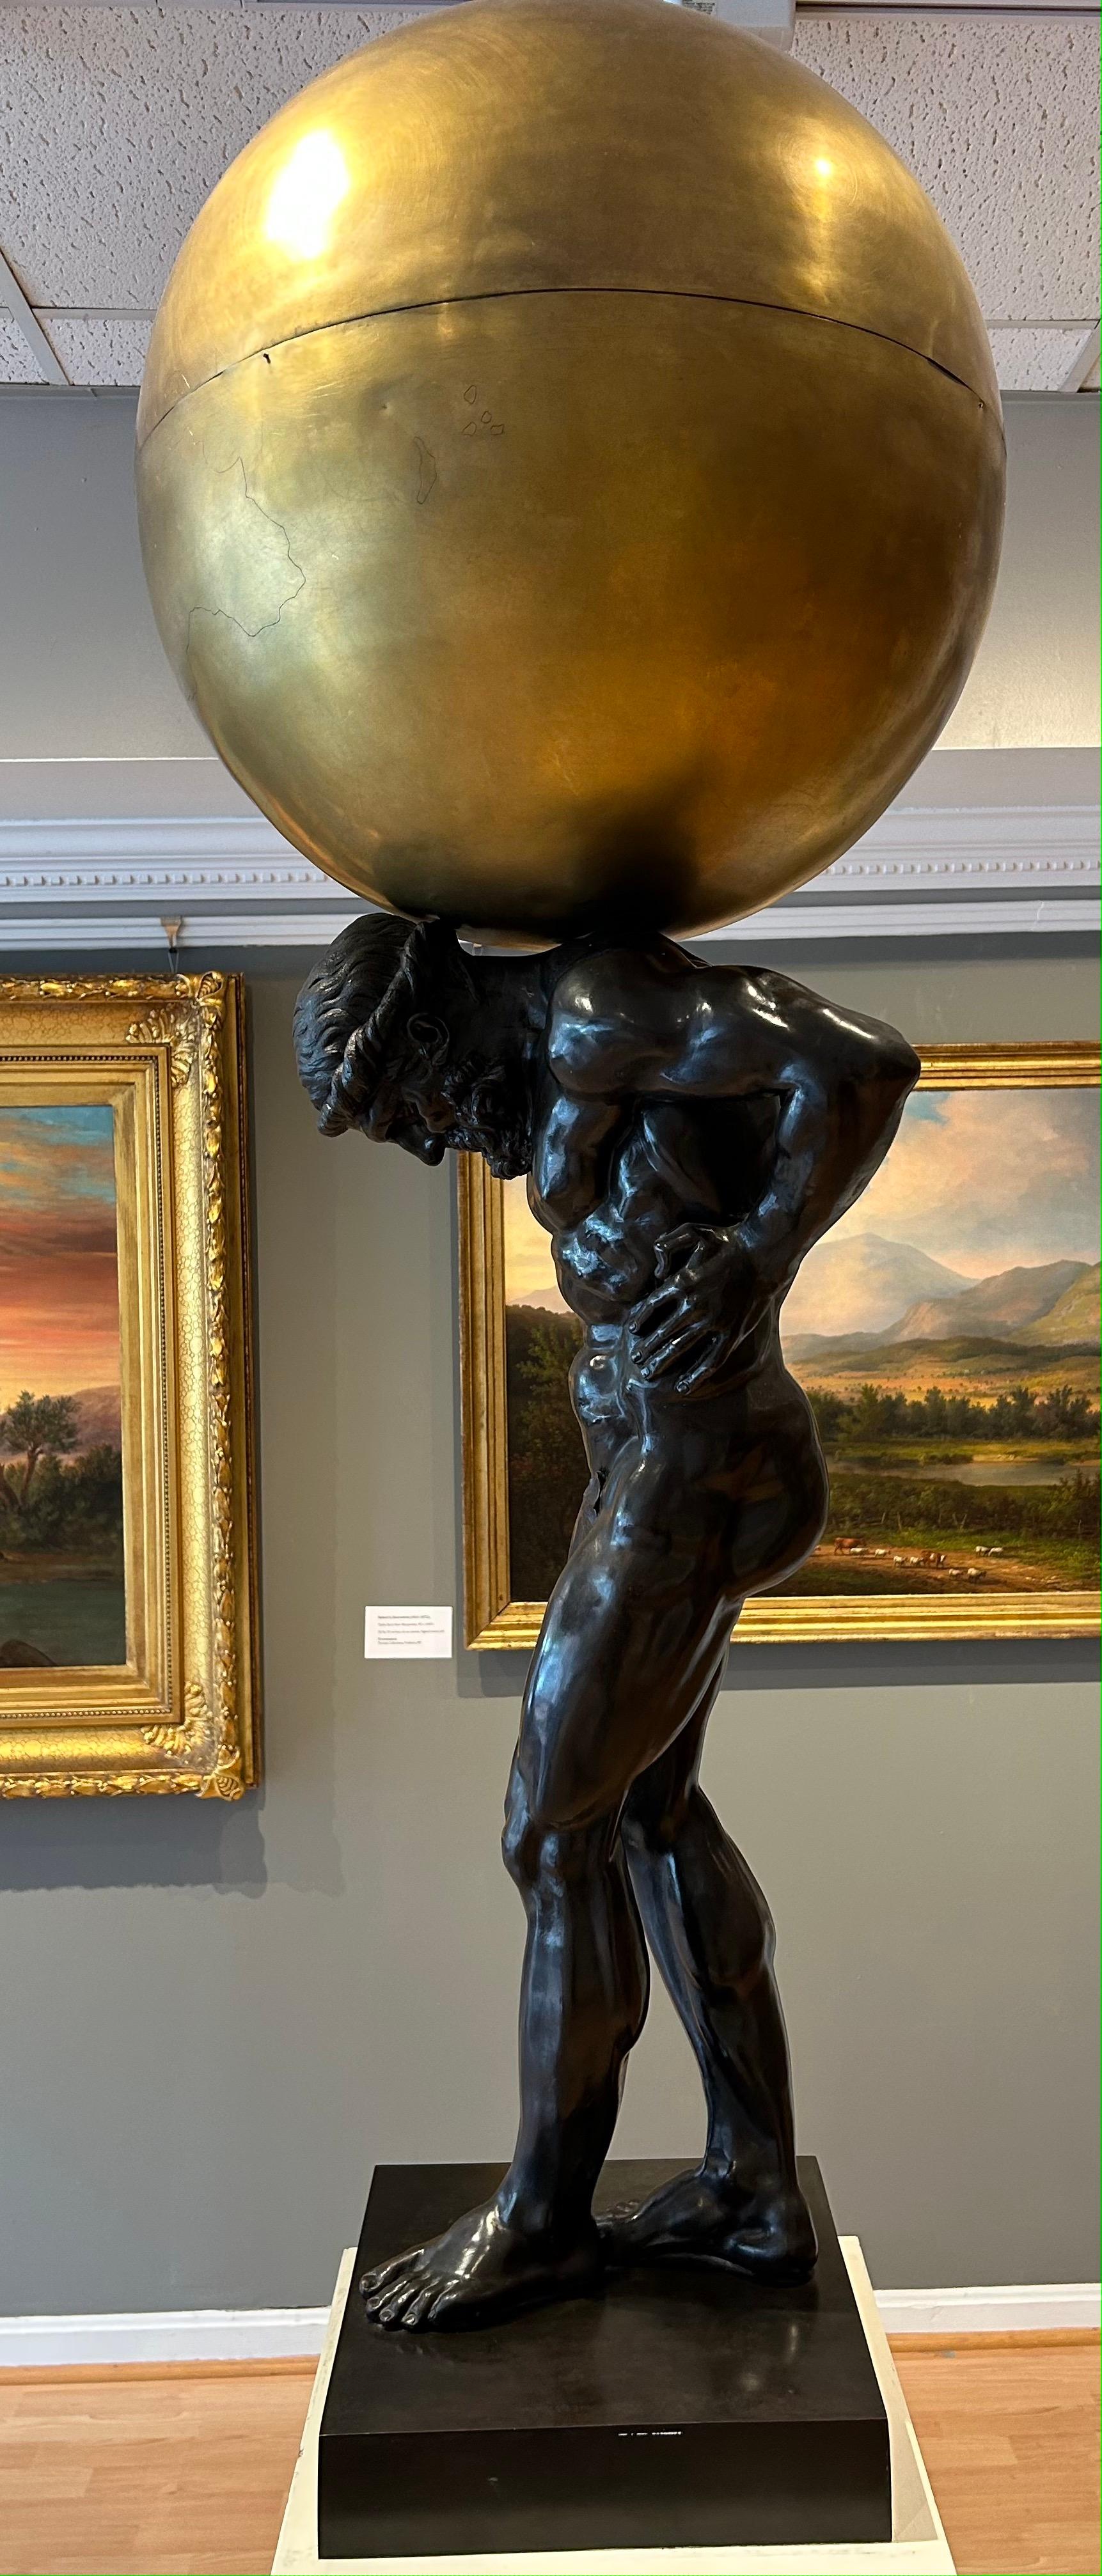 This pair of bronze sculptures of Atlas with Globe & Armillary Sphere are of high cast quality. Pairs have sold for over 700,000 Euro. Their condition is excellent for age and has very minor imperfections. The wooden pyramidal pedestals are